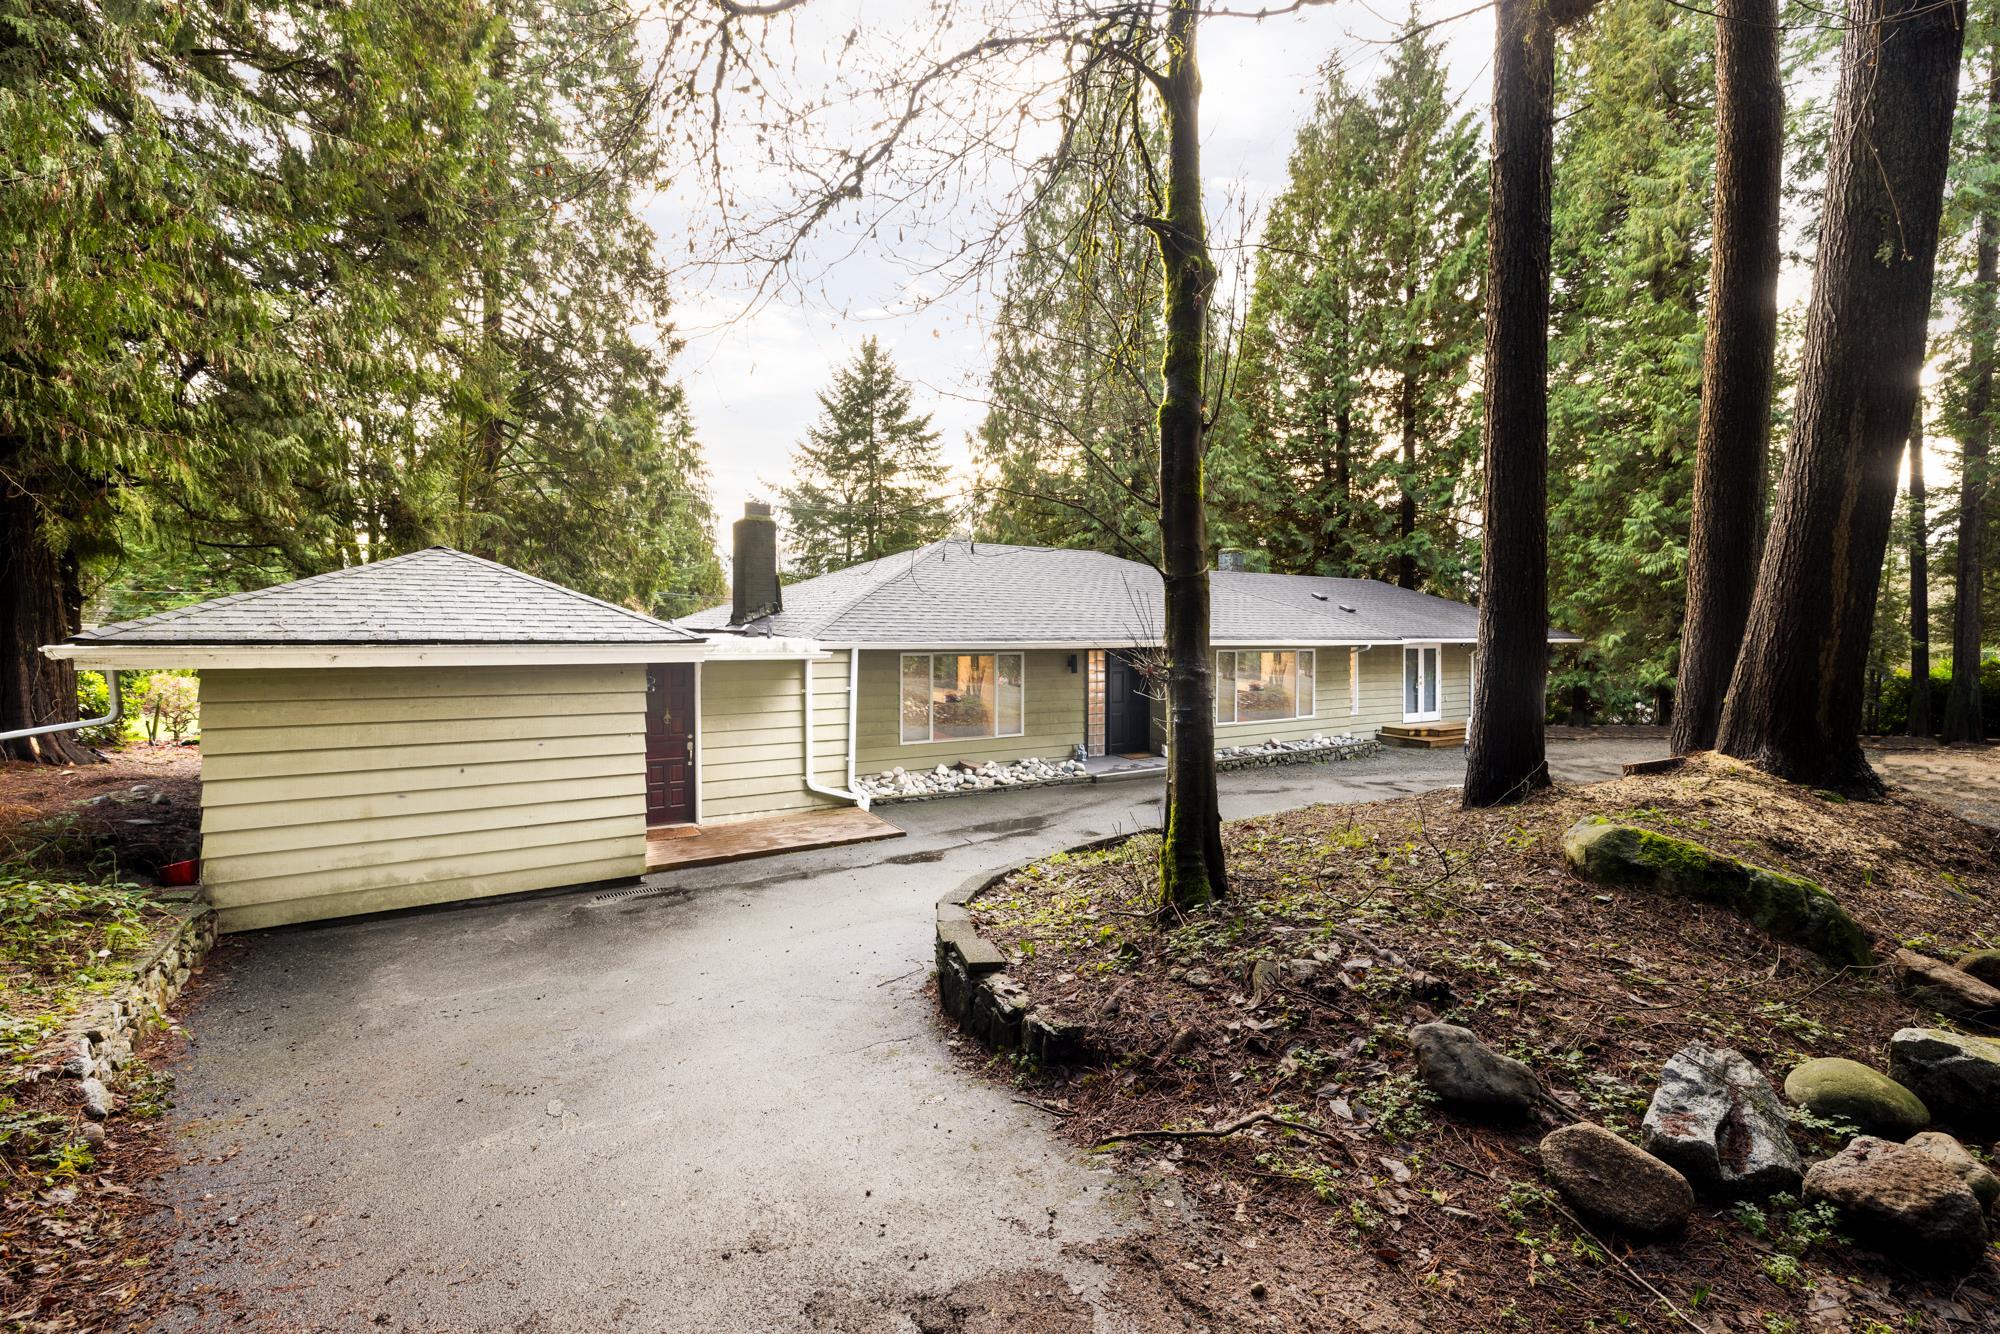 Listing image of 415 HADDEN DRIVE